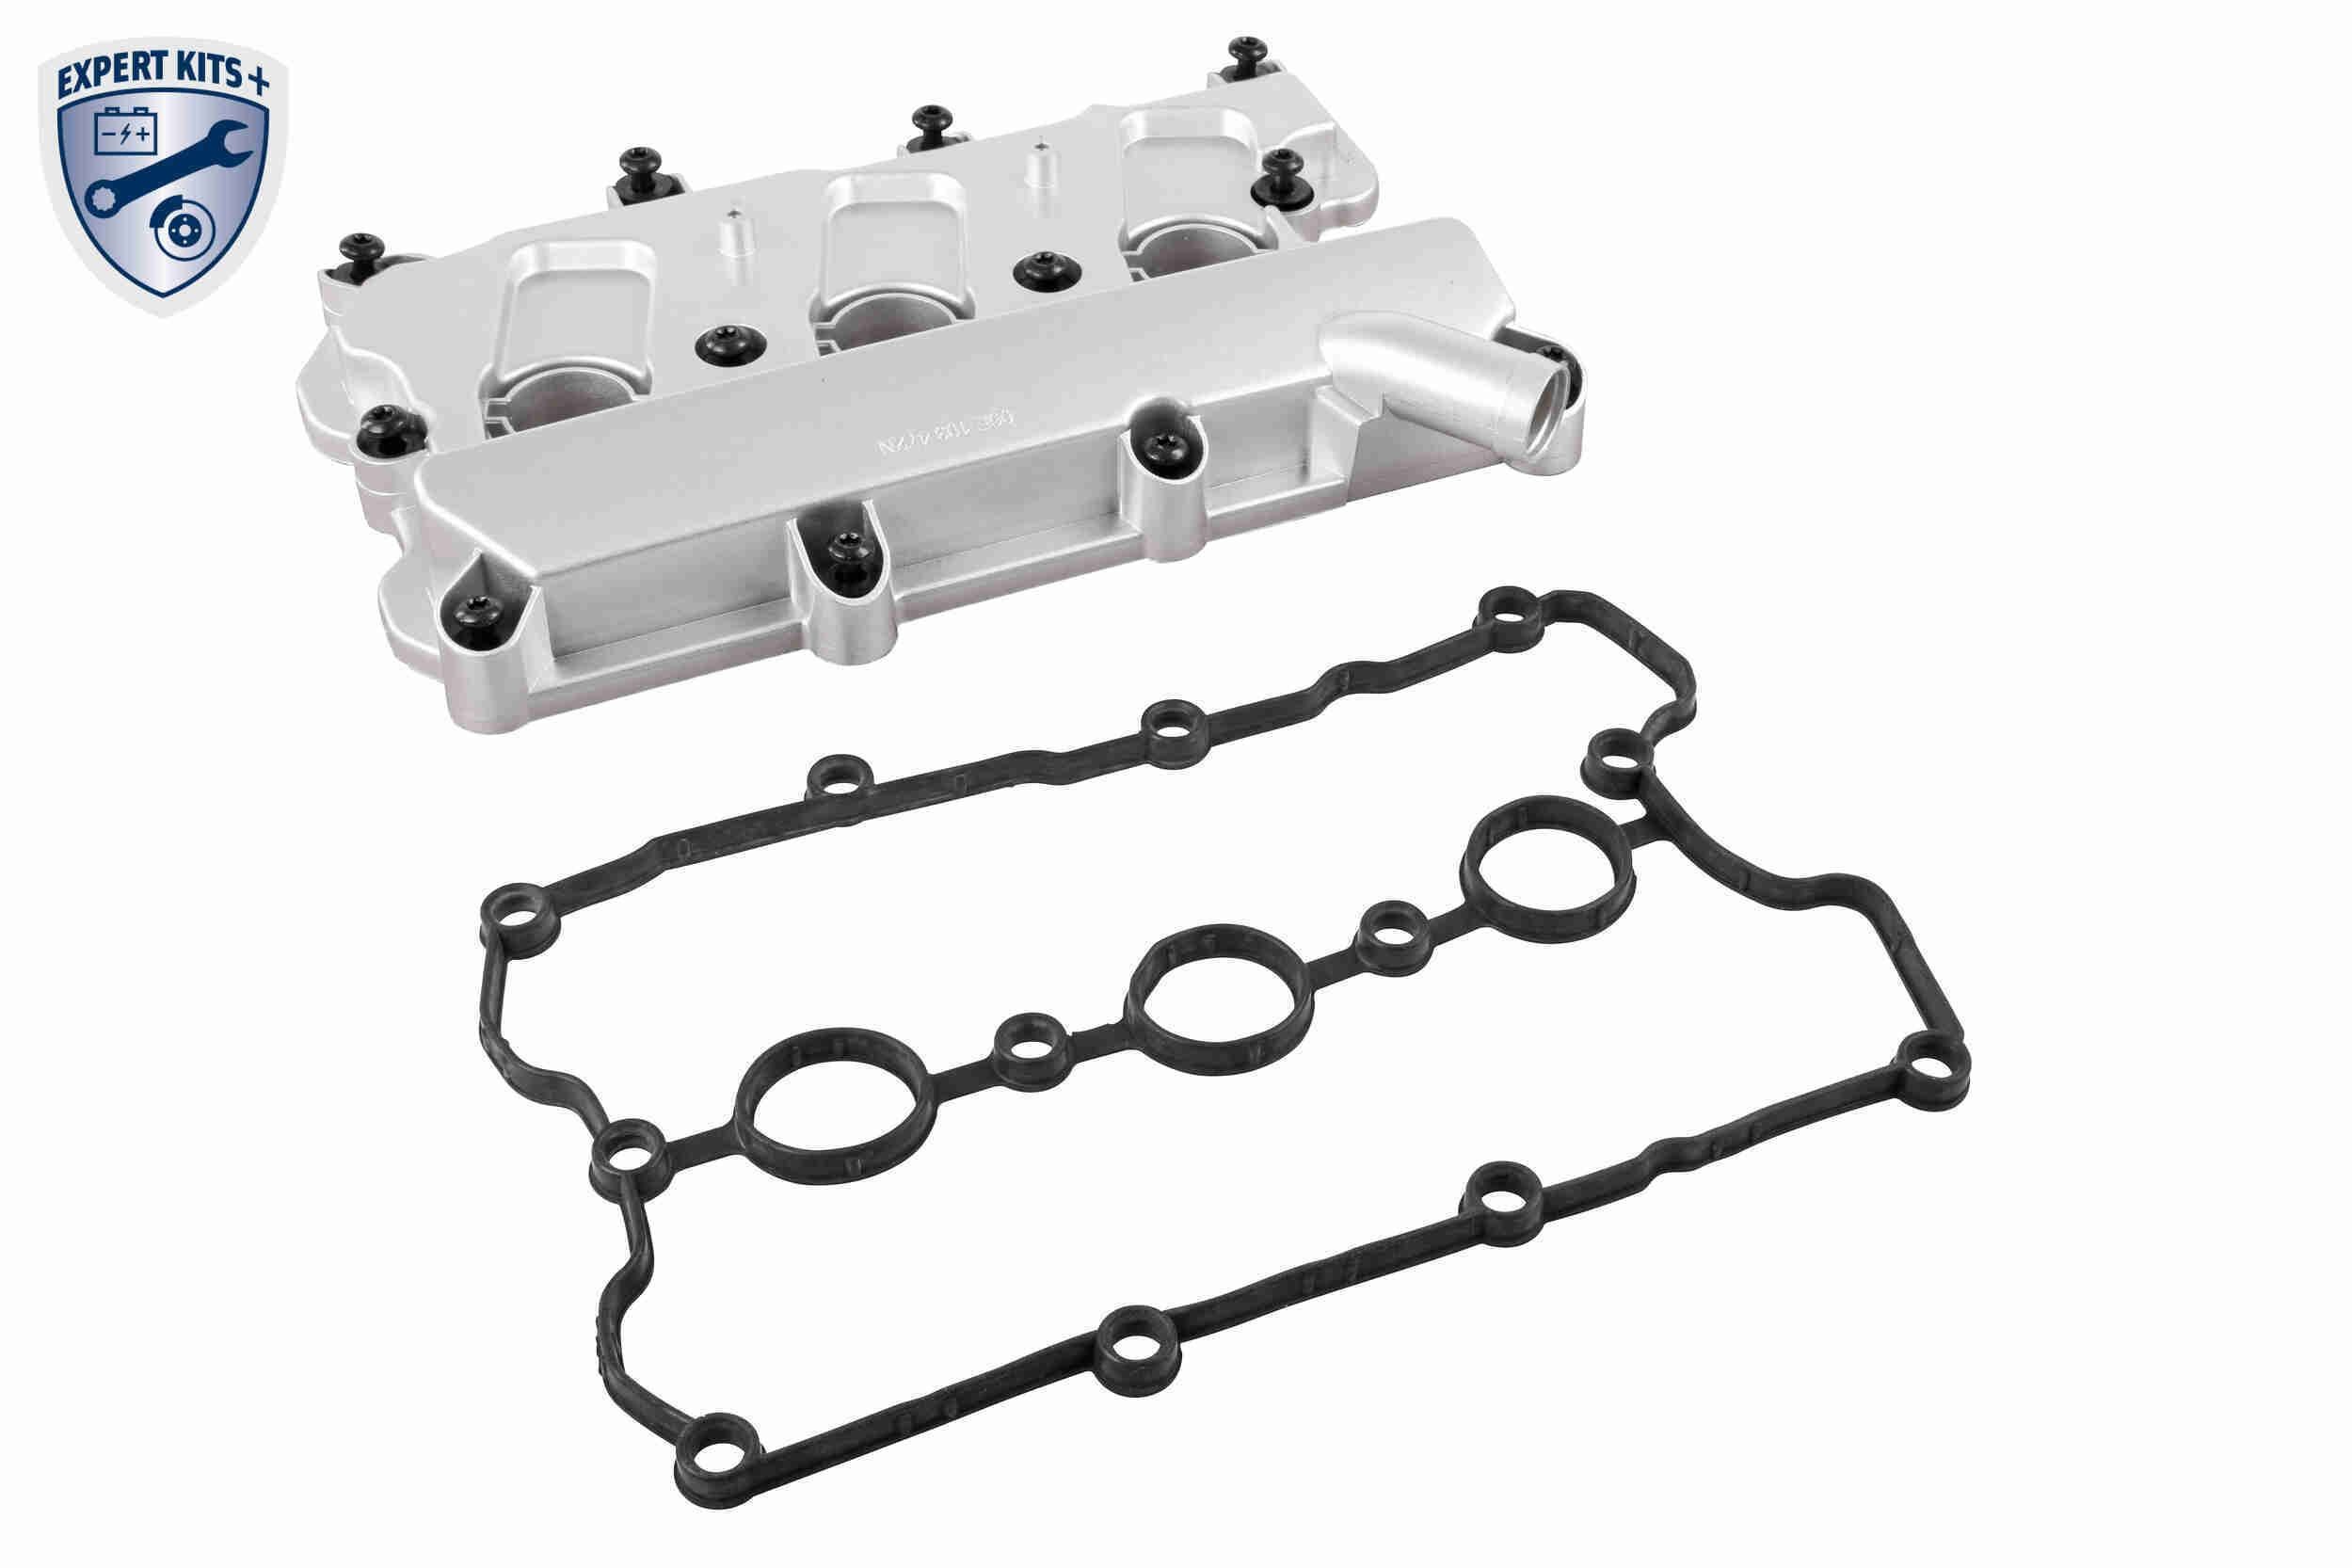 VAICO Right, for cylinder 1-3, with valve cover gasket, with bolts/screws, EXPERT KITS + Cylinder Head Cover V10-4950 buy